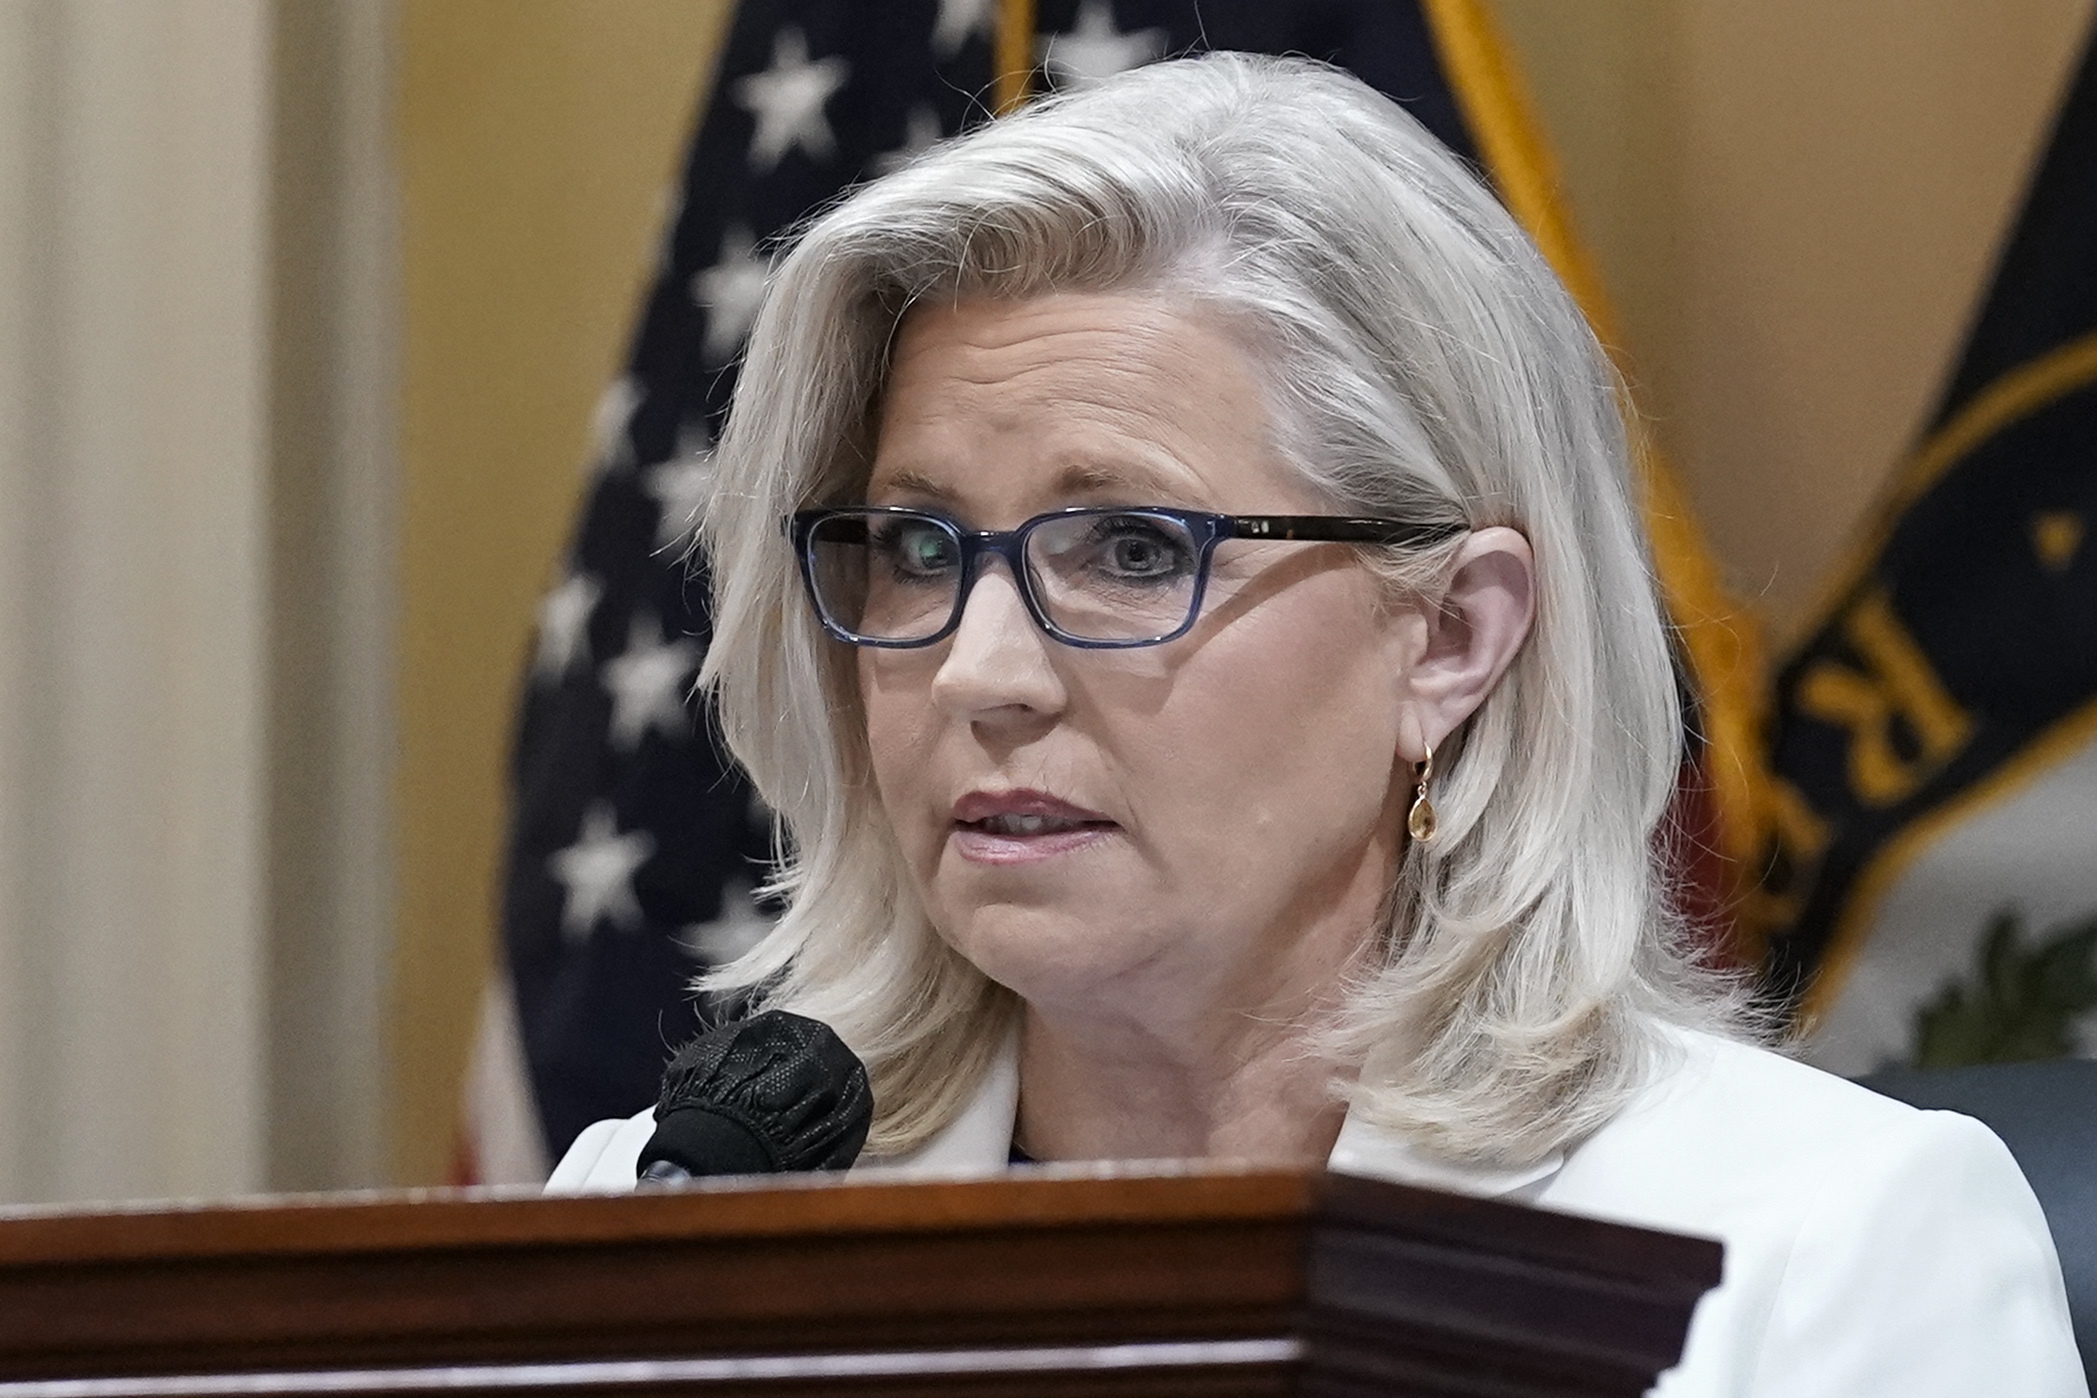 Liz Cheney braces for primary loss as focus shifts to 2024 WTOP News